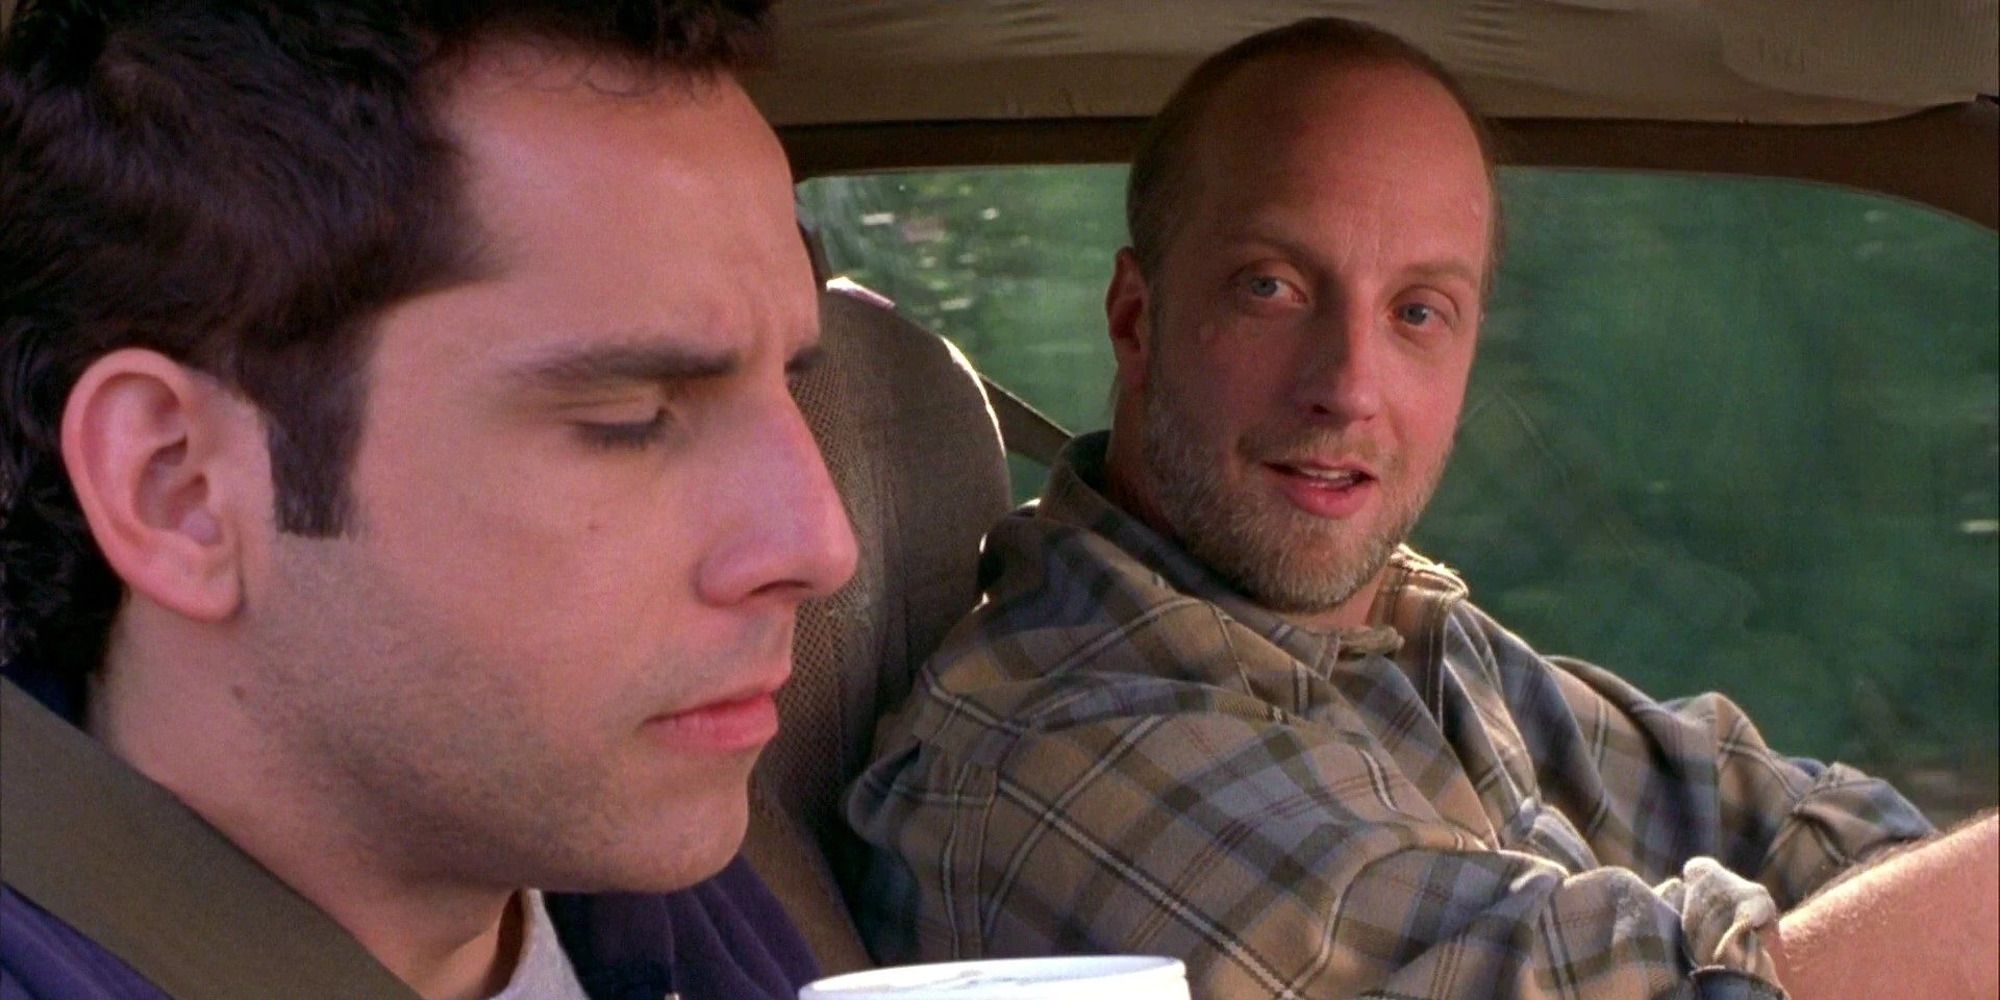 Ben Stiller as Ted Stroehmann and Chris Elliott as Dom Woganowski aka Woogie in There's Something About Mary